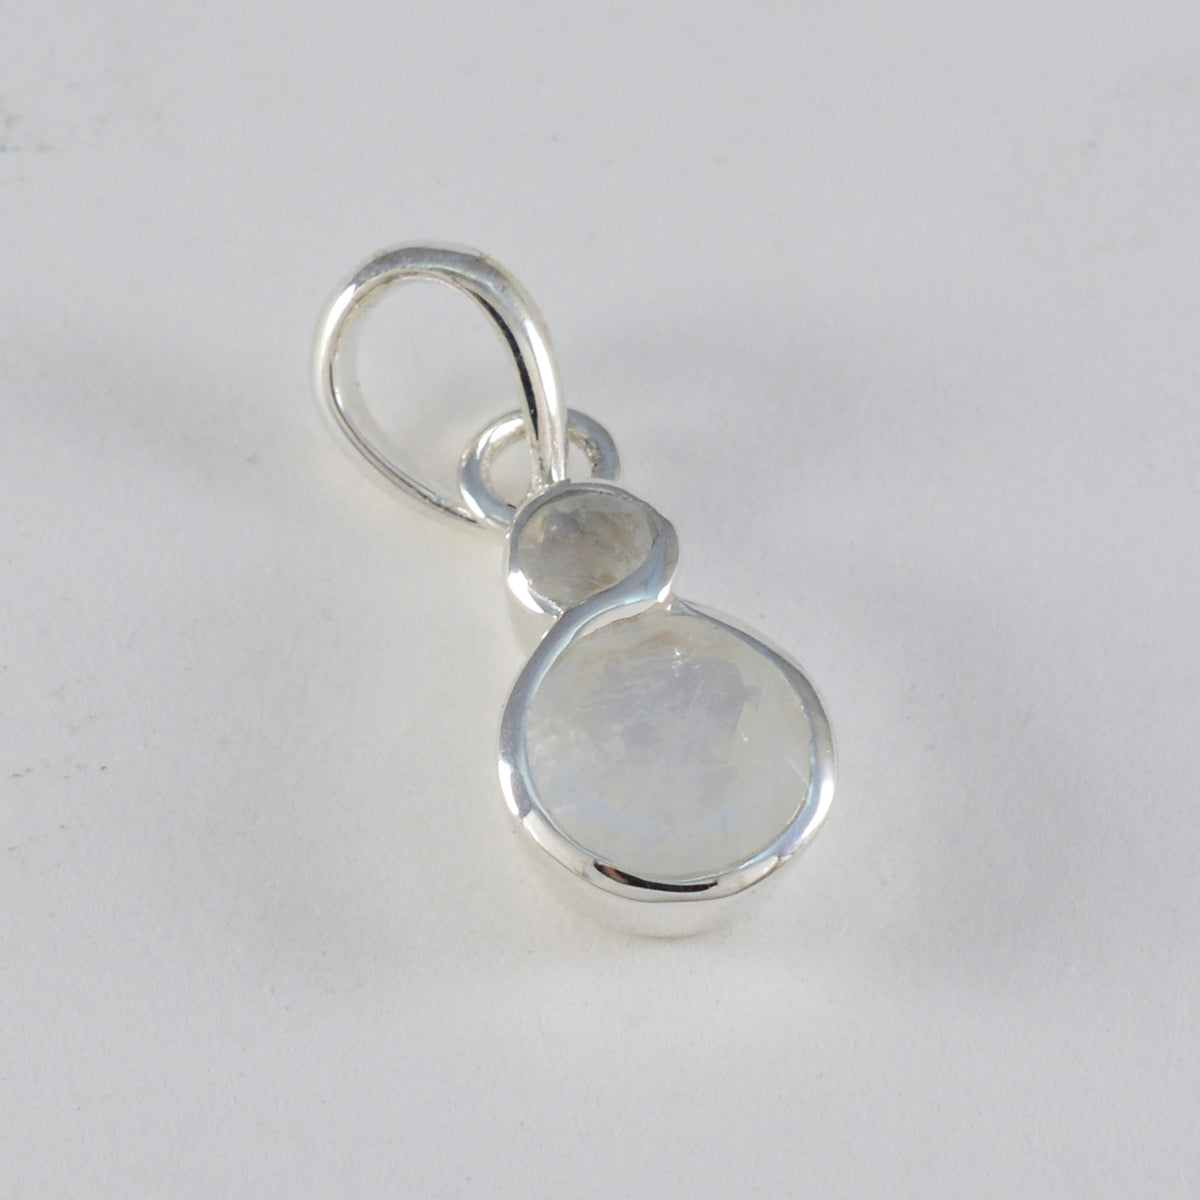 Riyo Gorgeous Gemstone Round Faceted White Rainbow Moonstone 1094 Sterling Silver Pendant Gift For Good Friday